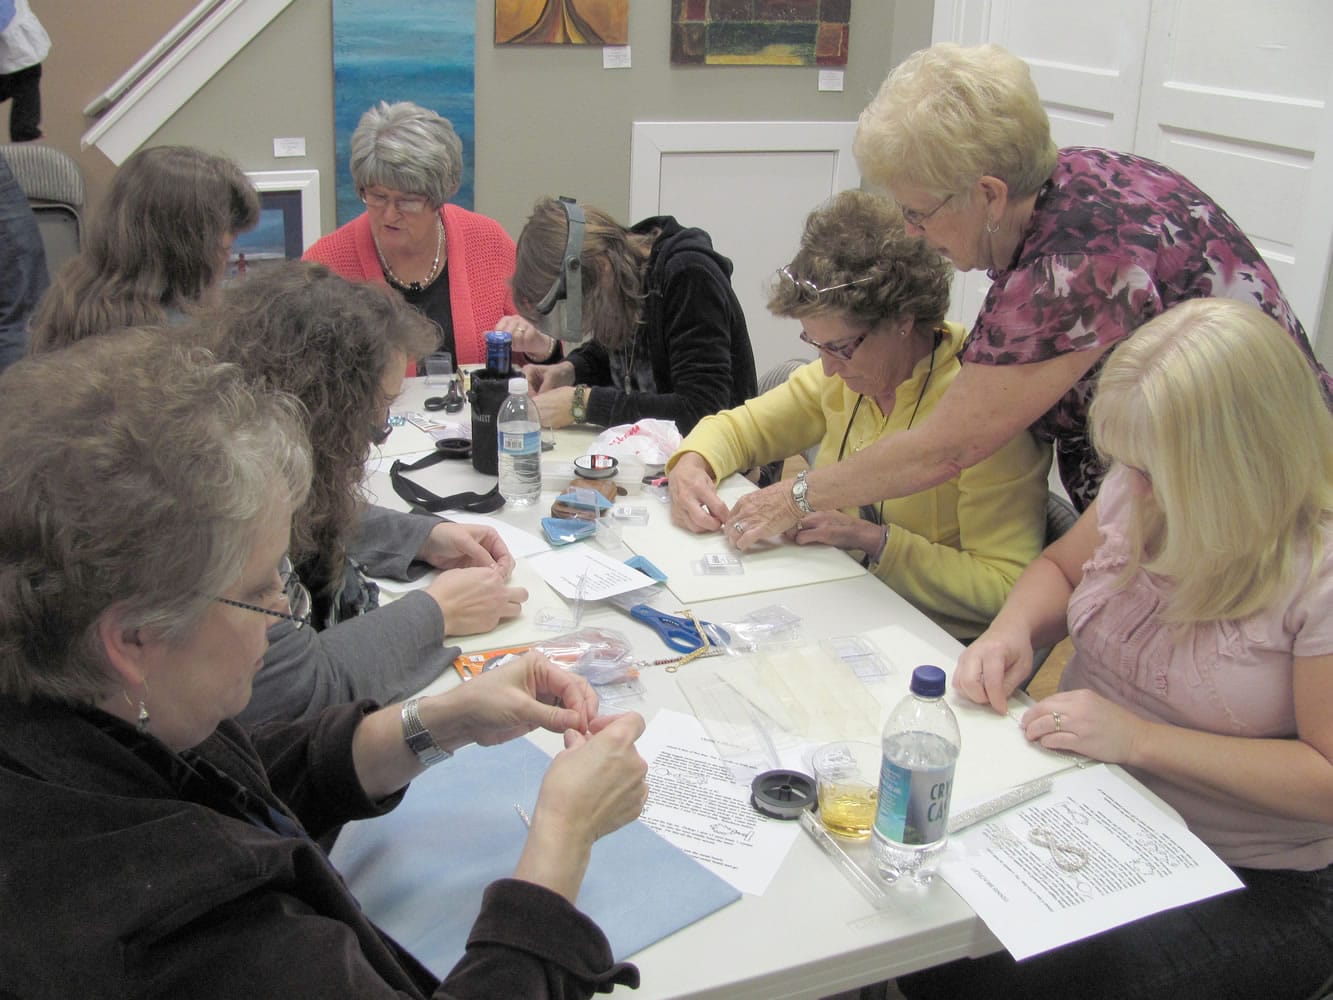 The instructors at Bead Paradise teach classes including basic beading and how to make tennis bracelets, &quot;Capture a Stone&quot; pendants and ornament covers.  Birthday parties and children's beading classes are also available.